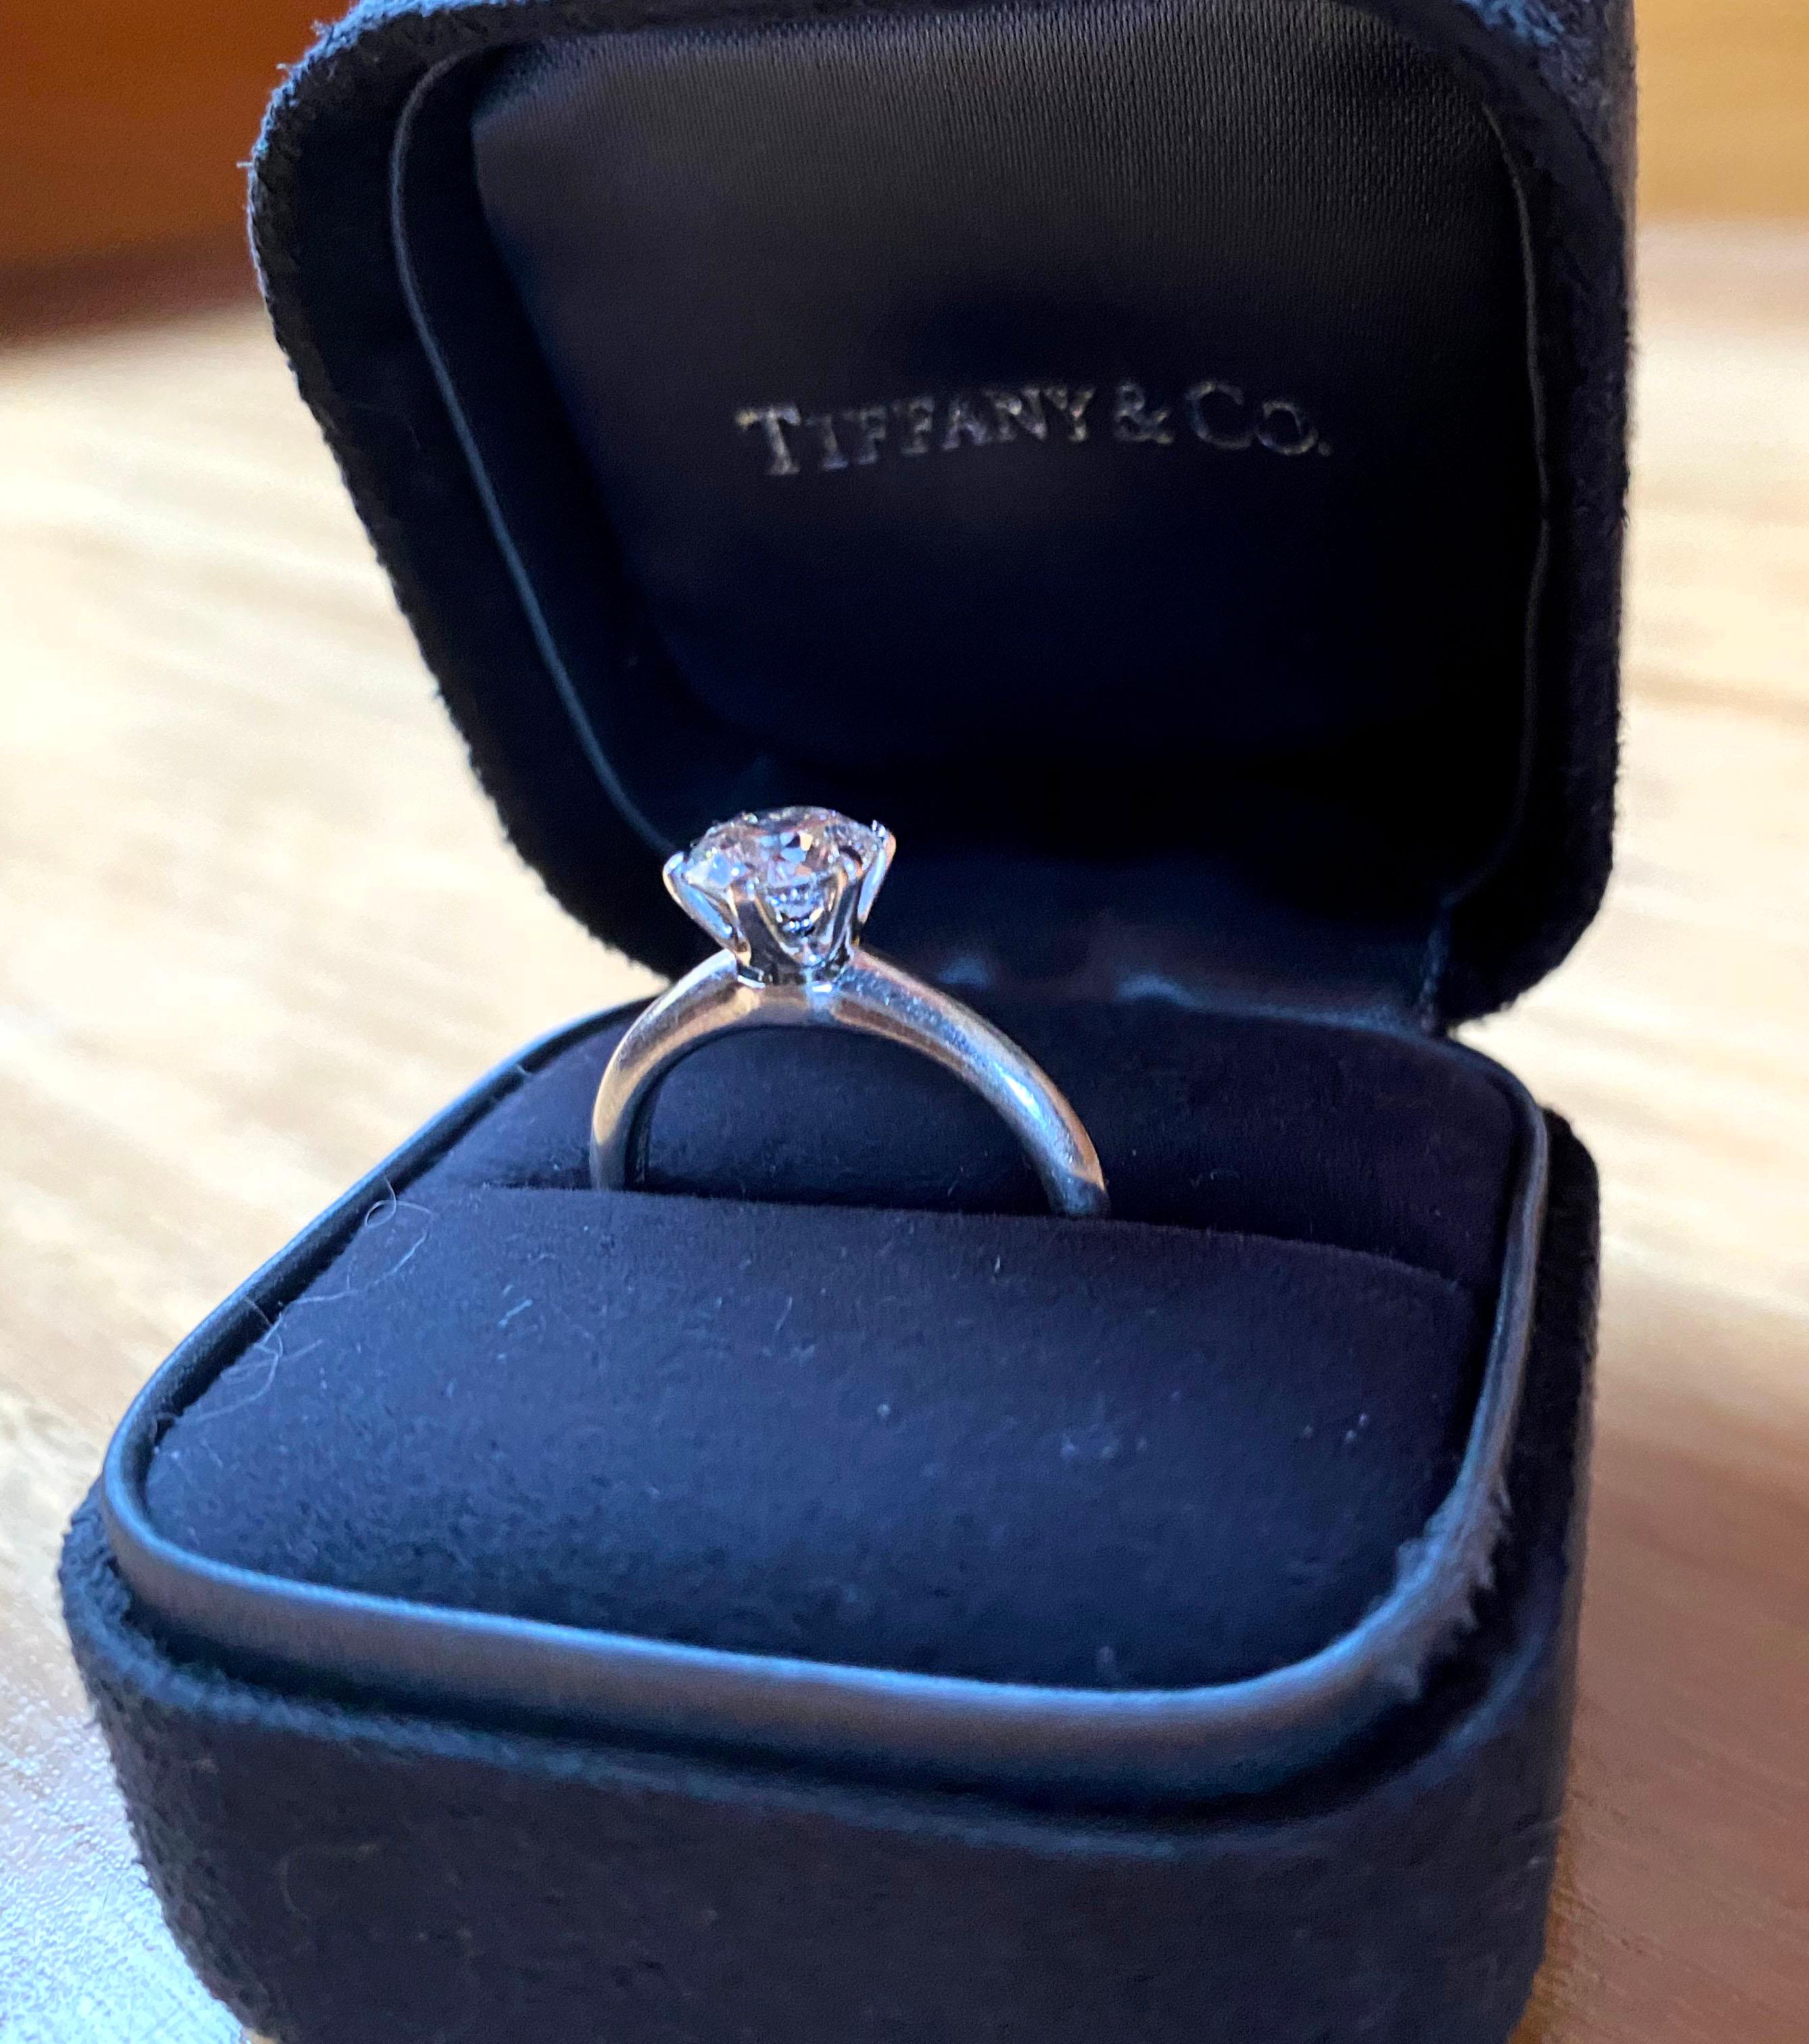 Unique features: 
Tiffany & Co platinum solitaire diamond ring approx. 5 grams in weight. The ring contains one round brilliant cut diamond, 1.29 carat, G colour, VS2 clarity, 

Metal: Platinum PT950
Carat: 1.29ct
Colour: G
Clarity: VS2
Cut: Round